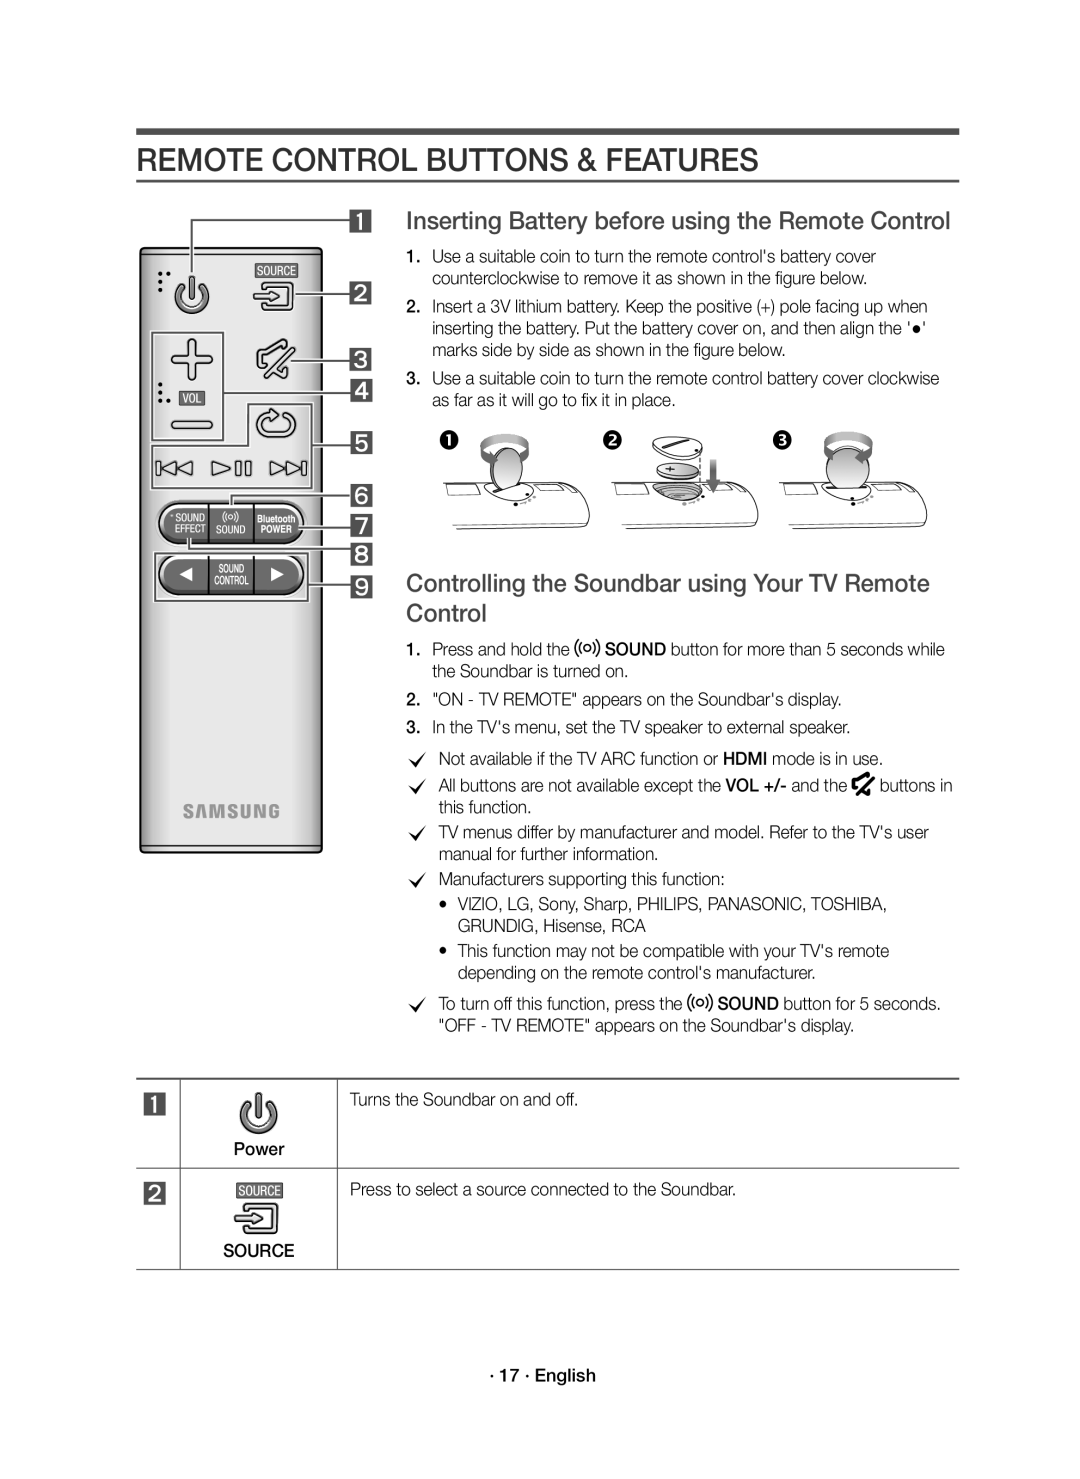 Samsung HW-K650/ZF, HW-K651/ZF Remote Control Buttons & Features,   , Inserting Battery before using the Remote Control 